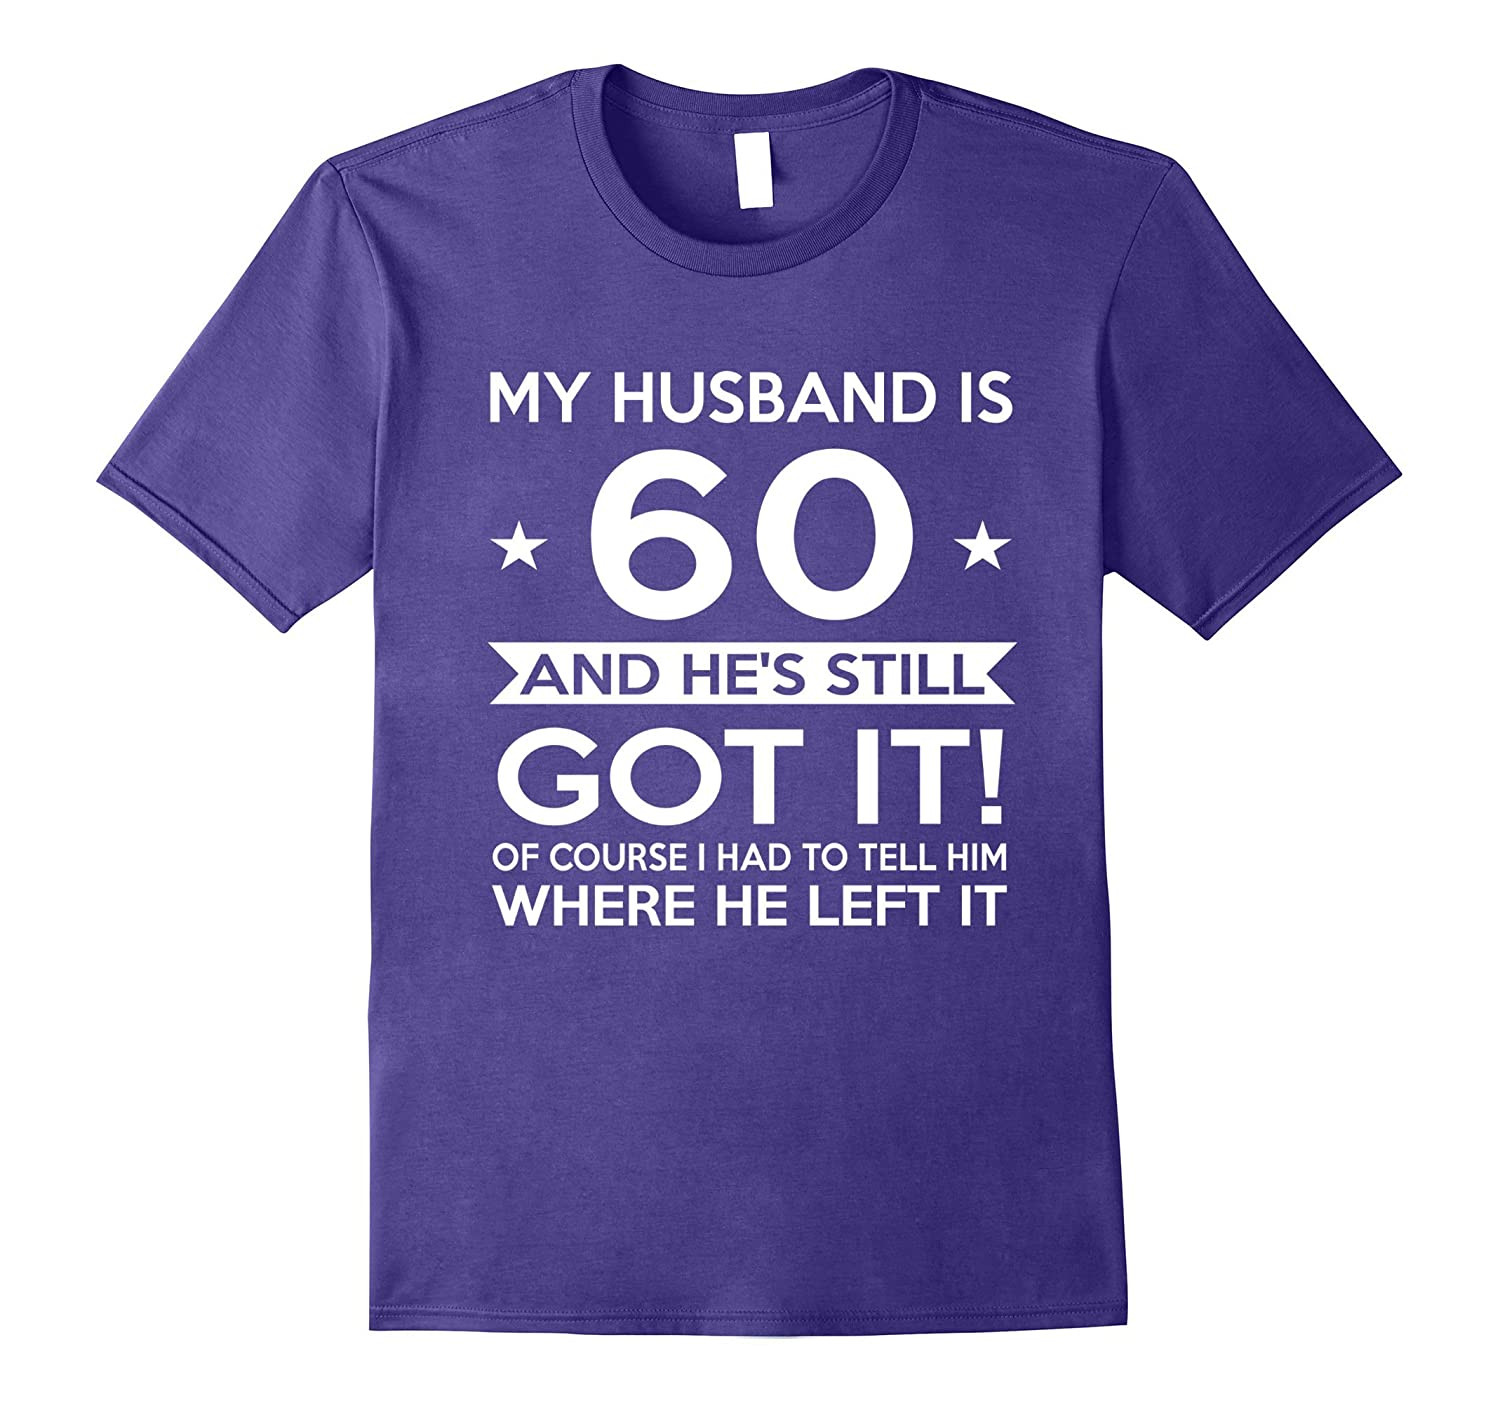 Gift Ideas For Husbands Birthday
 My Husband is 60 60th Birthday Gift Ideas for him CL